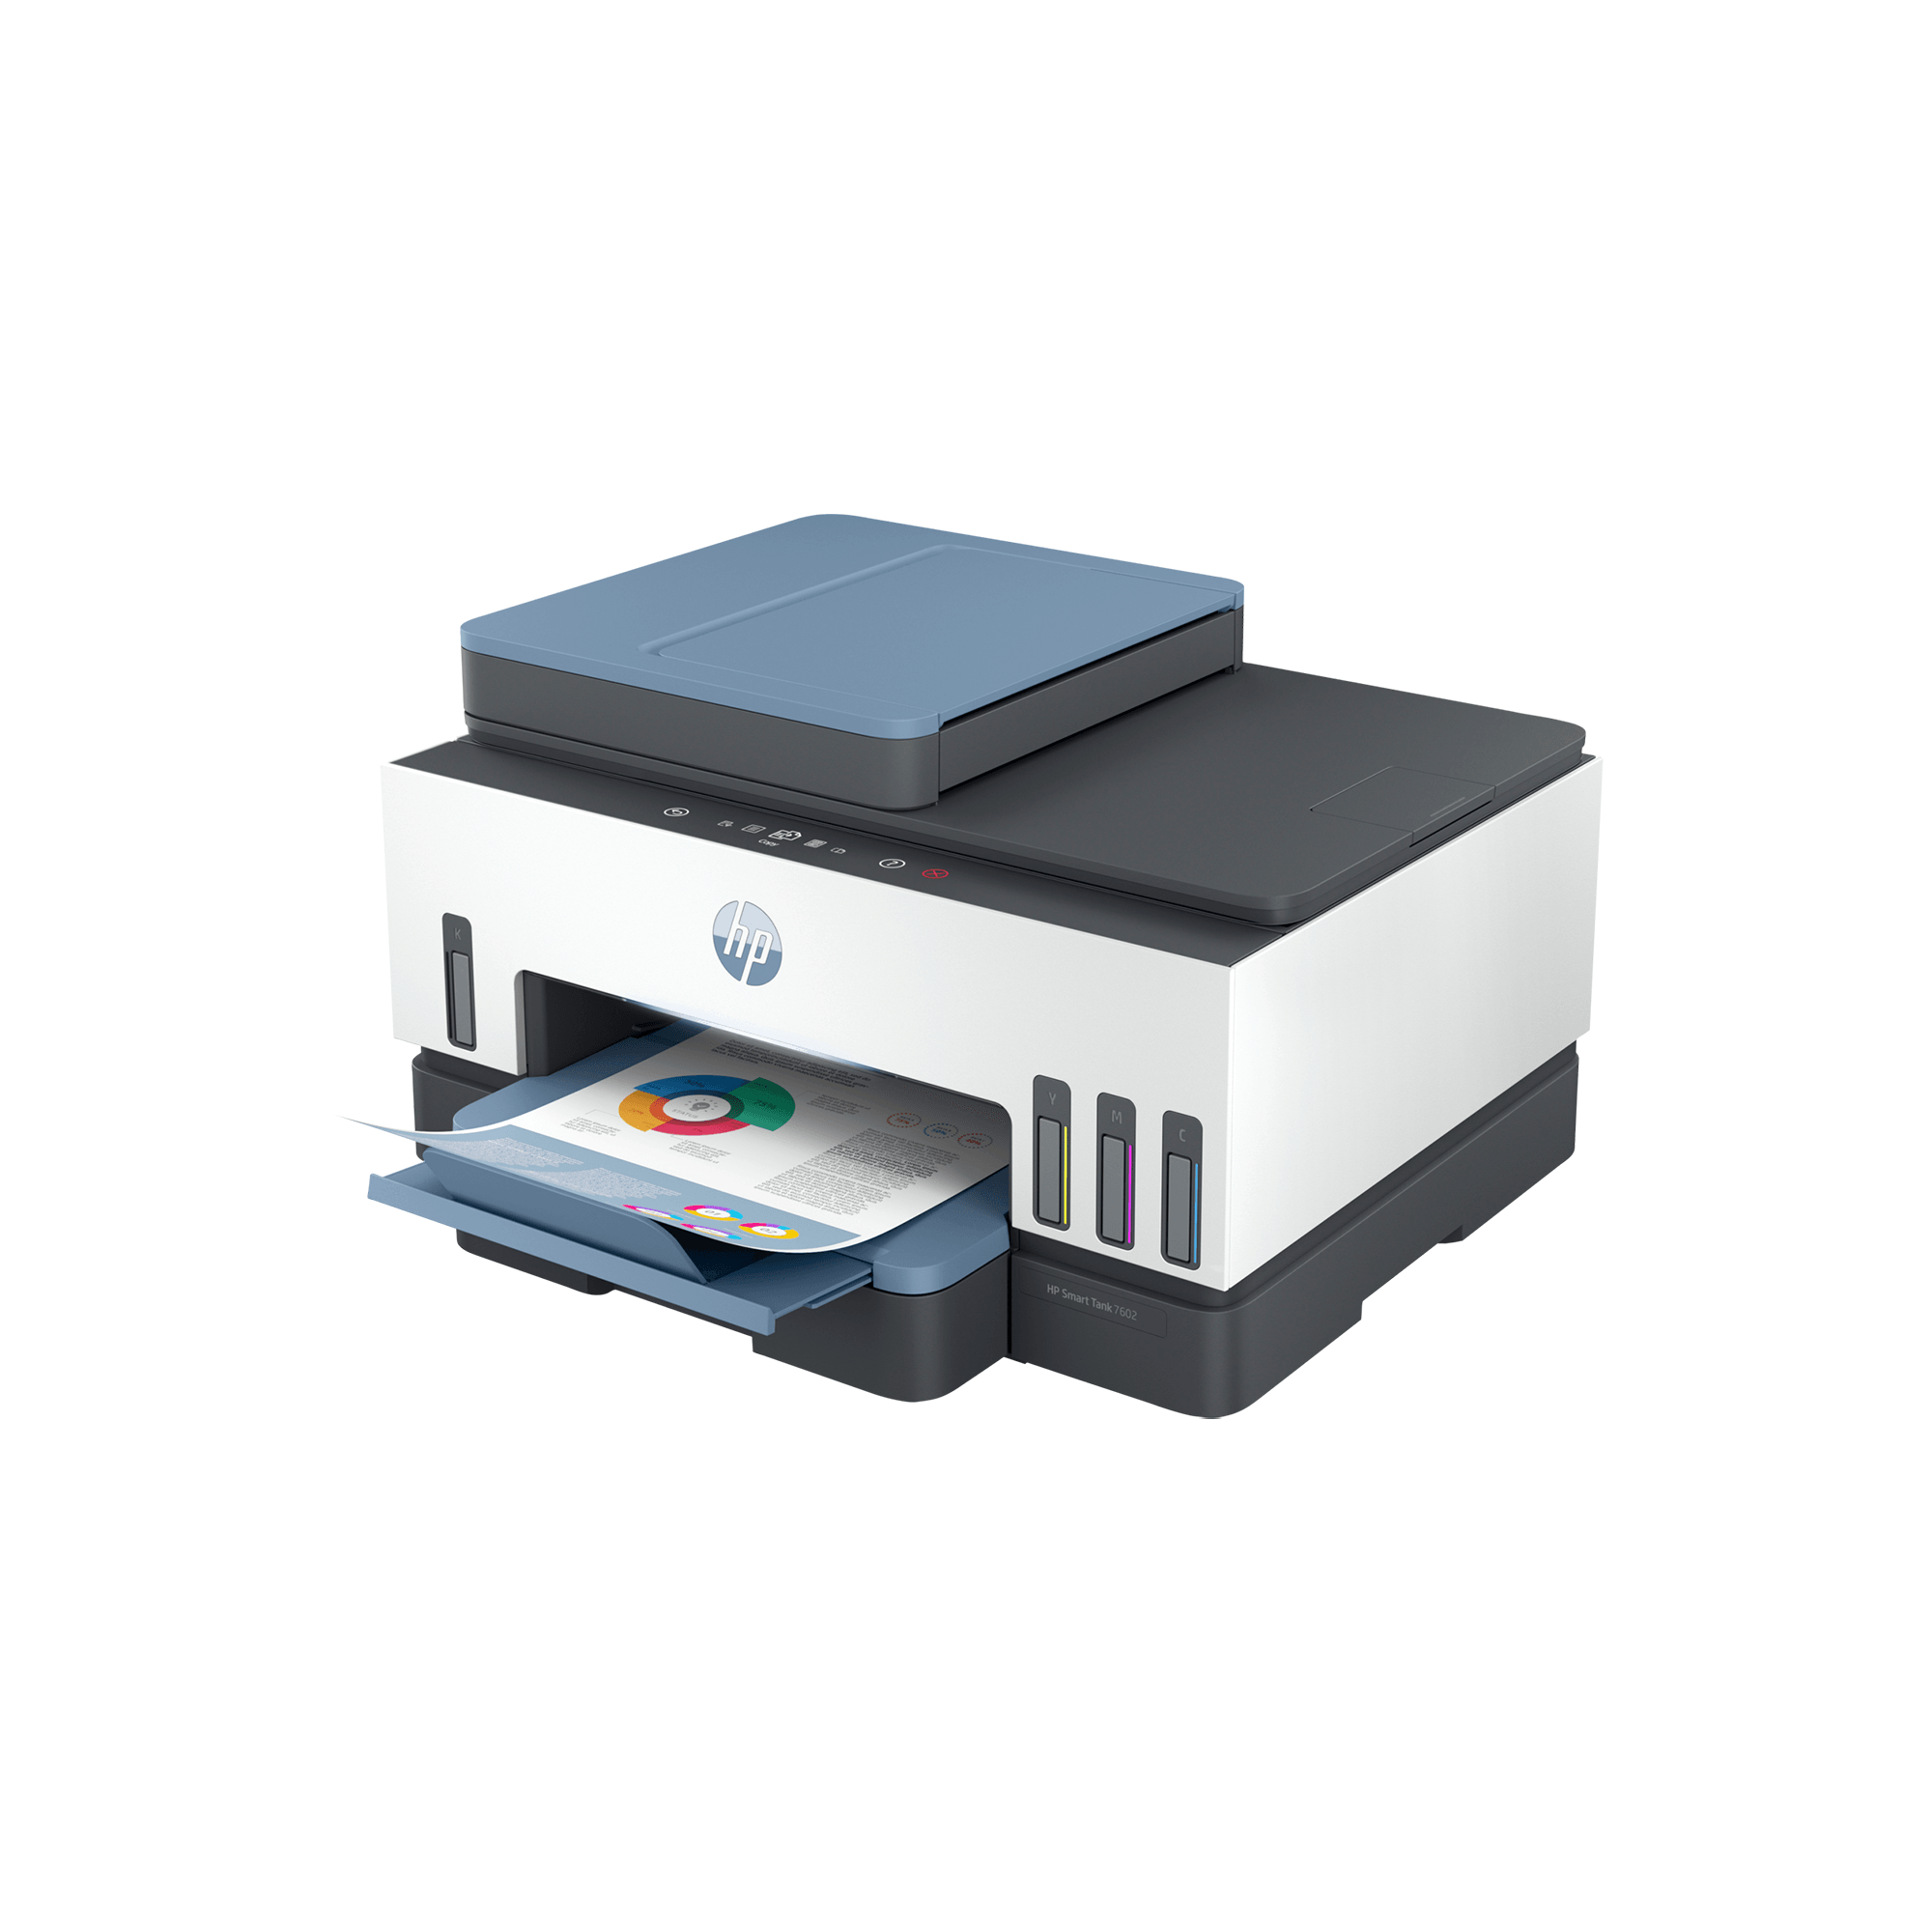 HP Smart Tank 7602 All-in-One Printer